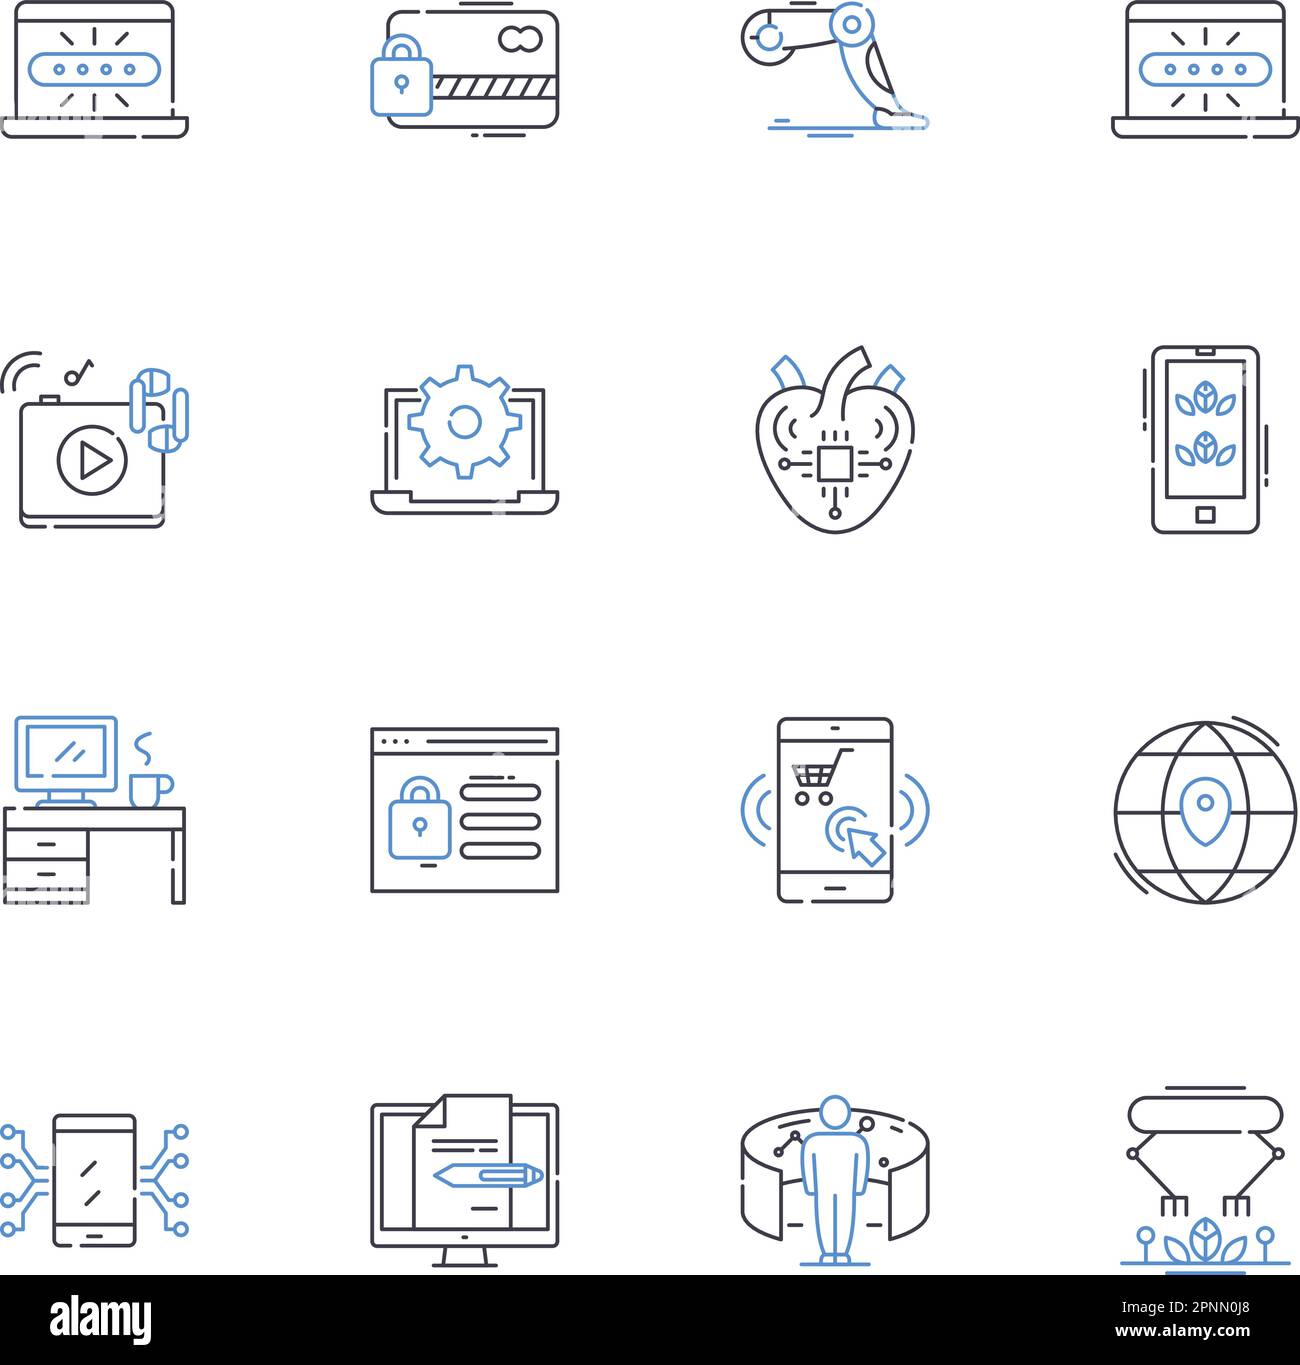 Wireless line icons collection. Connectivity, Signal, Bluetooth, Nerk, WiFi, Antenna, Transmission vector and linear illustration. Technology,Mobile Stock Vector